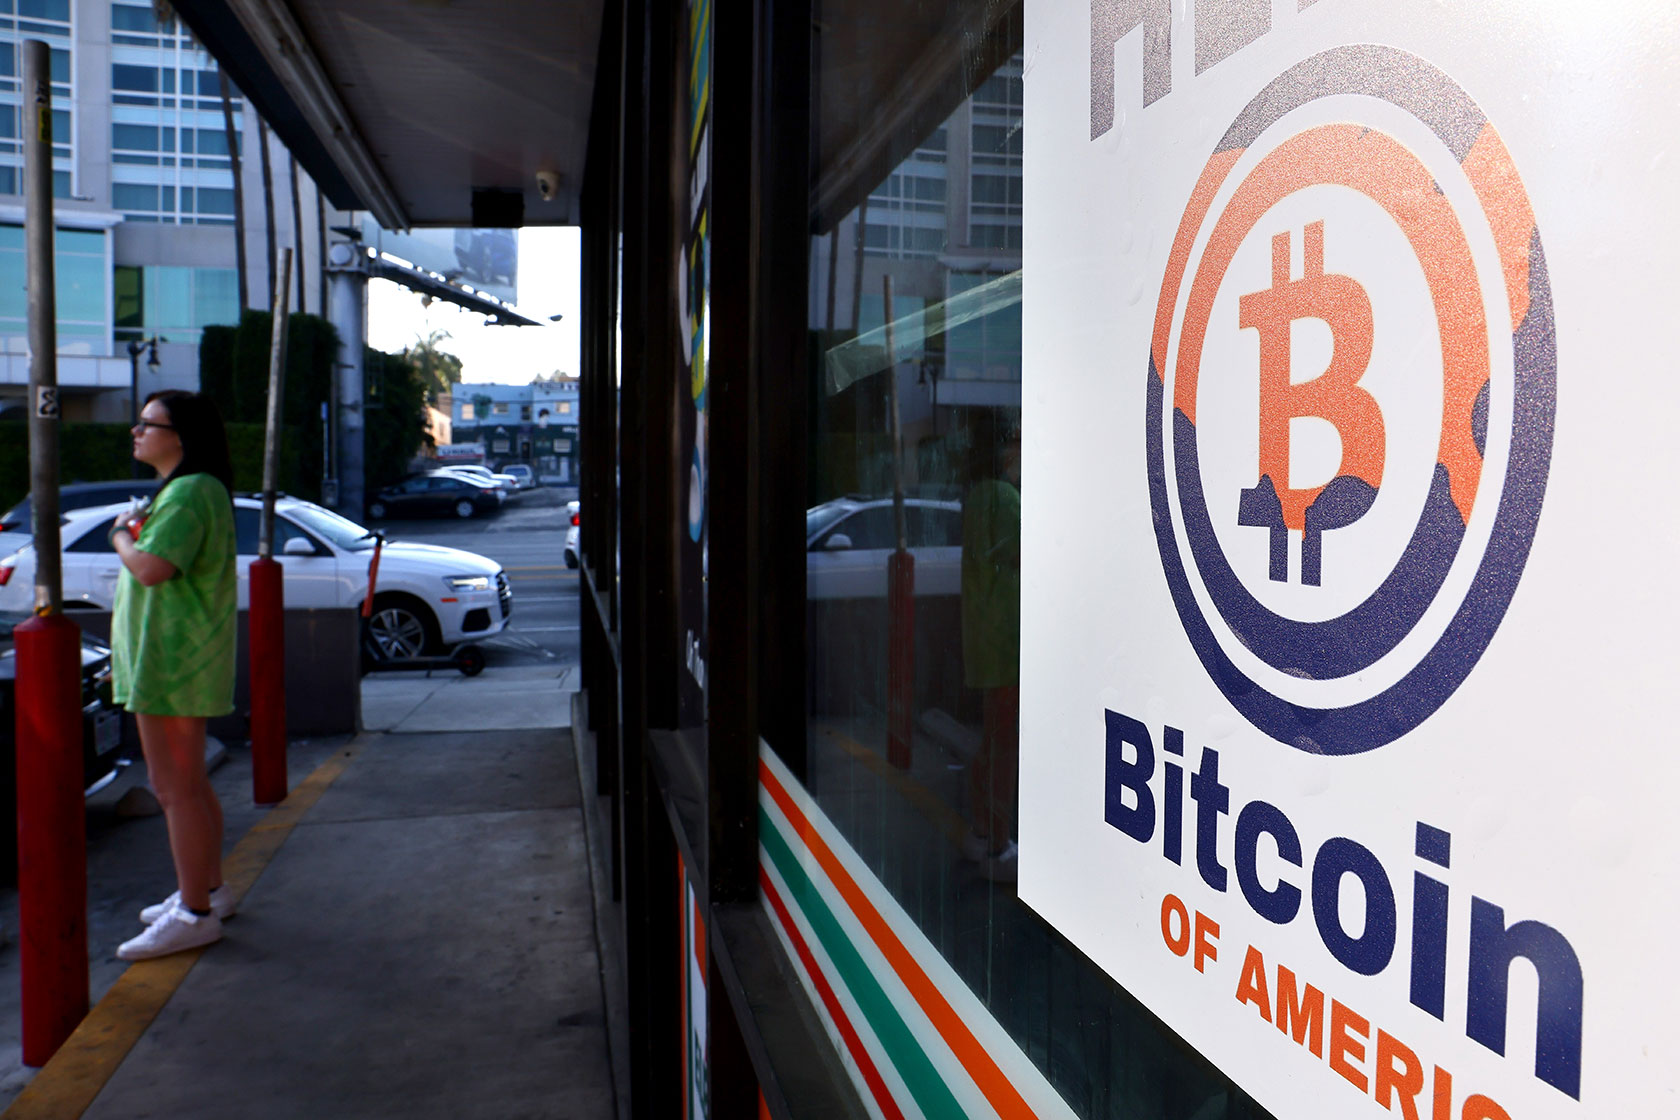 Photo shows a sign with the Bitcoin symbol in a storefront window, with a woman standing on the sidewalk in the background.